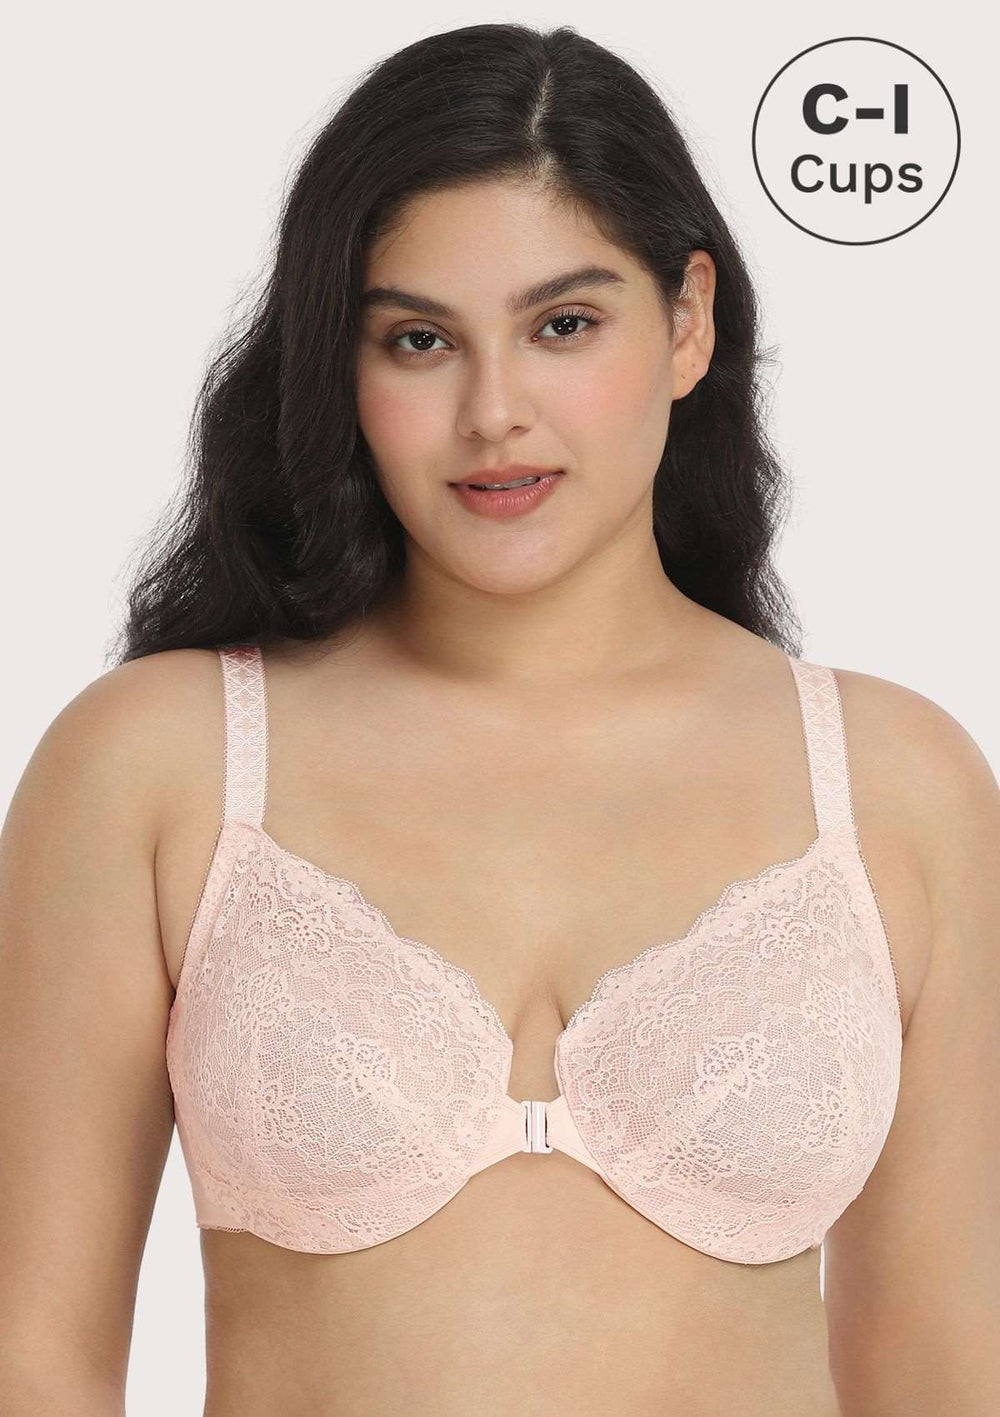 Bras Plus Size Women Bra Big Breast Push Up Sexy Lace Back Closure  Intimates Underwire Full Cup 38 40 42 44 46 D/DD/DDD/E/F/G From 34,5 €